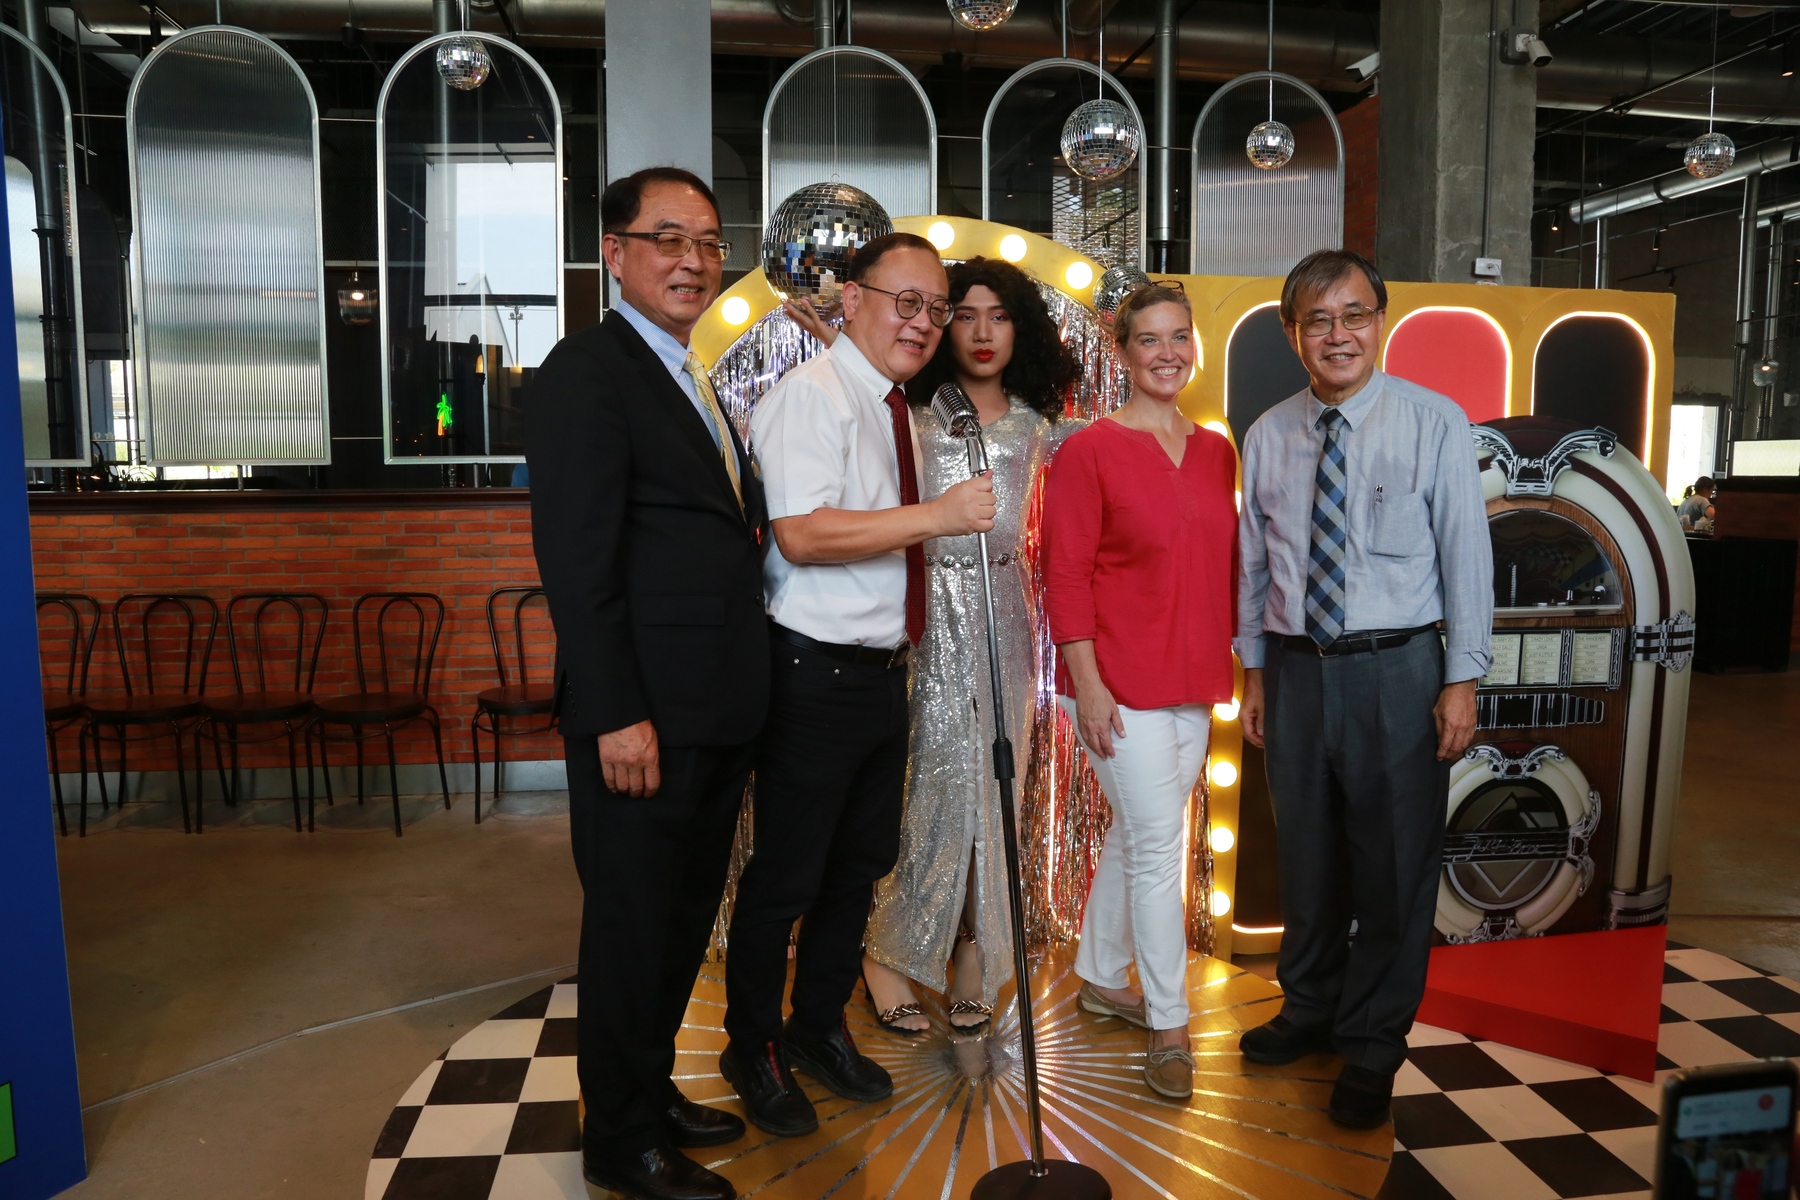 This exhibit displayed American restaurants, bars, record stores, gold jewelry stores, and trading houses. NSYSU President Ying-Yao Cheng (first from the right), AIT Director Sandra Oudkirk (second from the right), Director of MOFA Southern Taiwan Office Douglas Cheng-Tsung Shen (first from the left), and Kaohsiung Deputy Mayor Shyy Che (second from the left) visited the exhibit together.